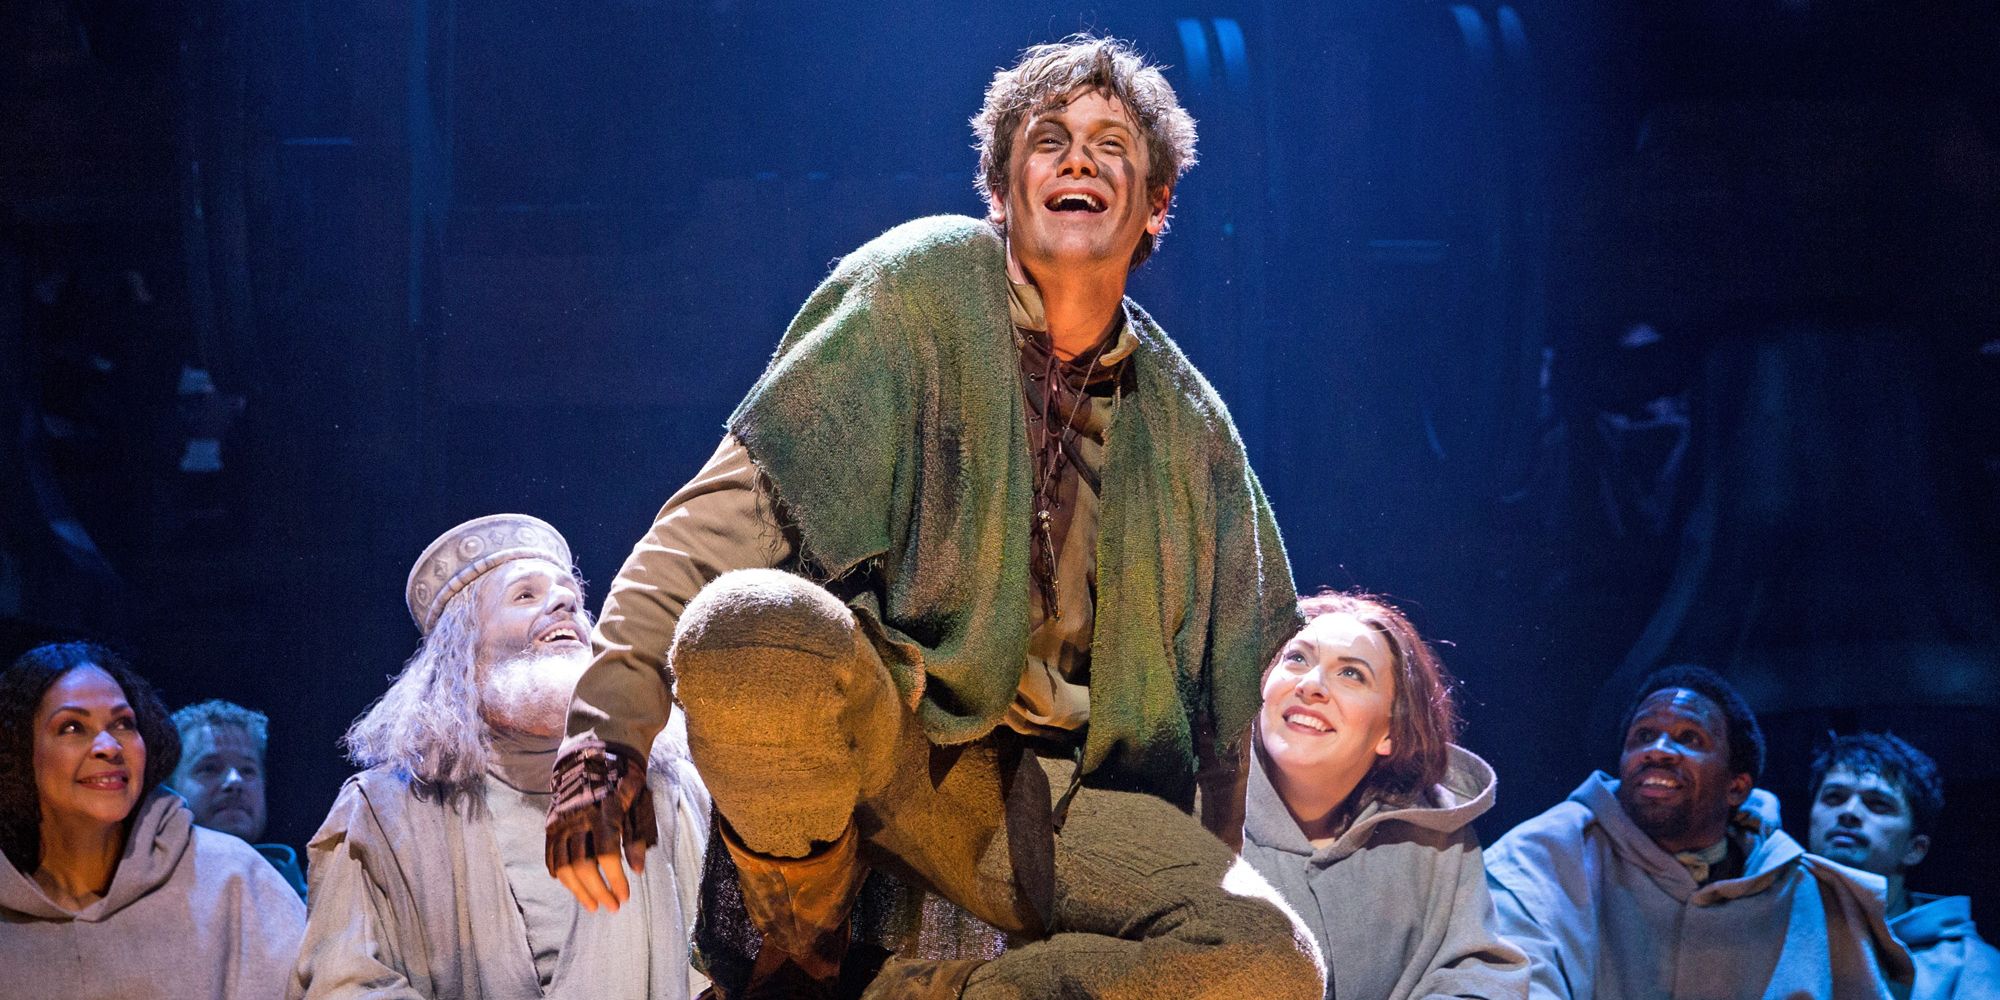 Michael Arden as Quasimodo in the Hunchback of Notre Dame play